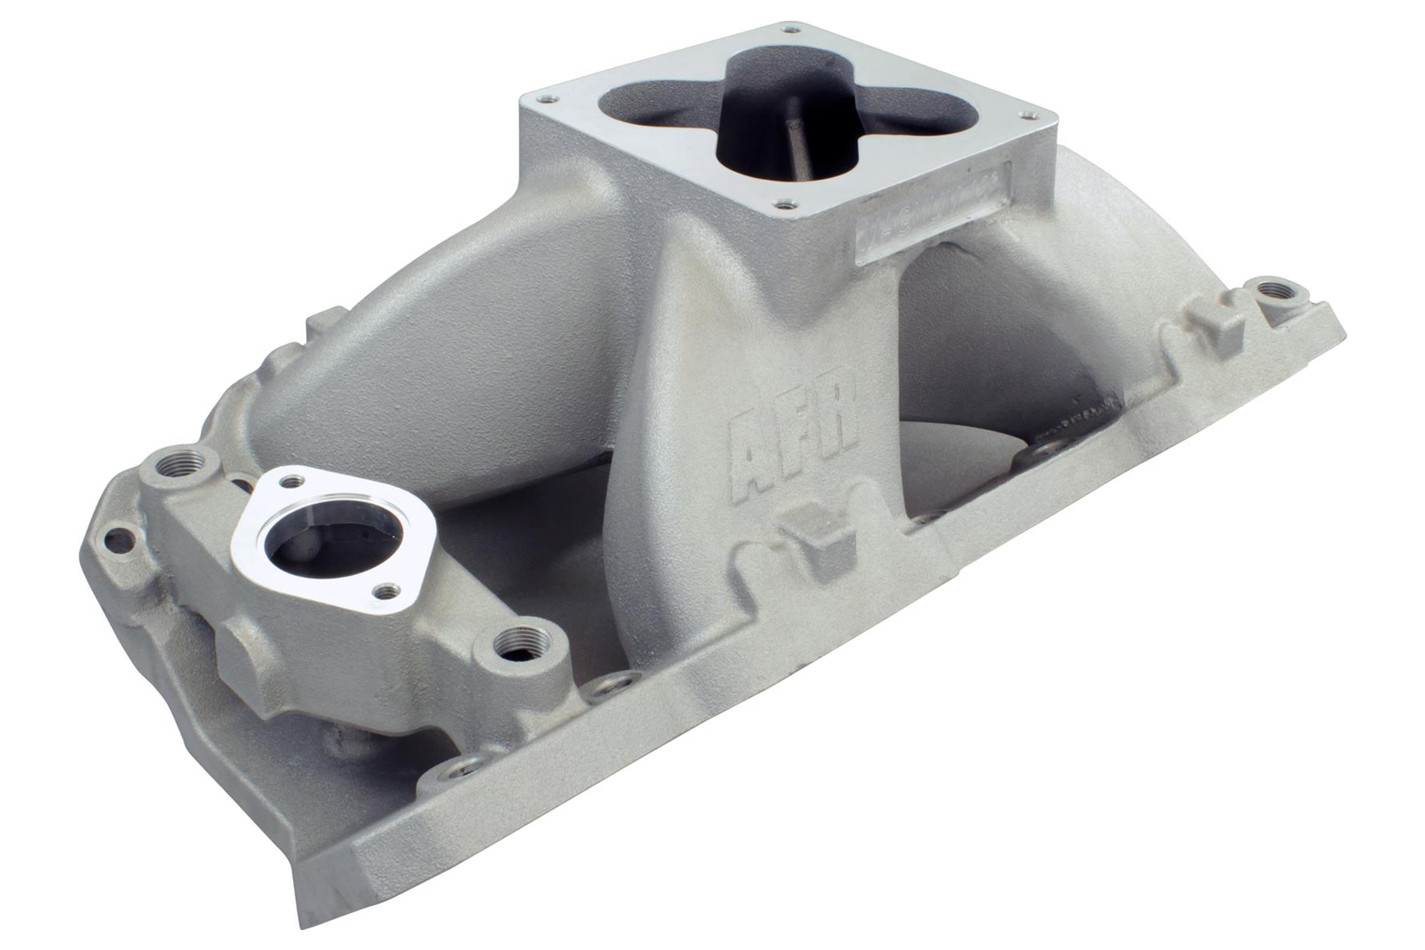 Air Flow Research 4901 Intake Manifold, Dominator Flange, Single Plane, Rectangle Port, Aluminum, Natural, 18 Degree Head, Tall Deck, Big Block Chevy, Each